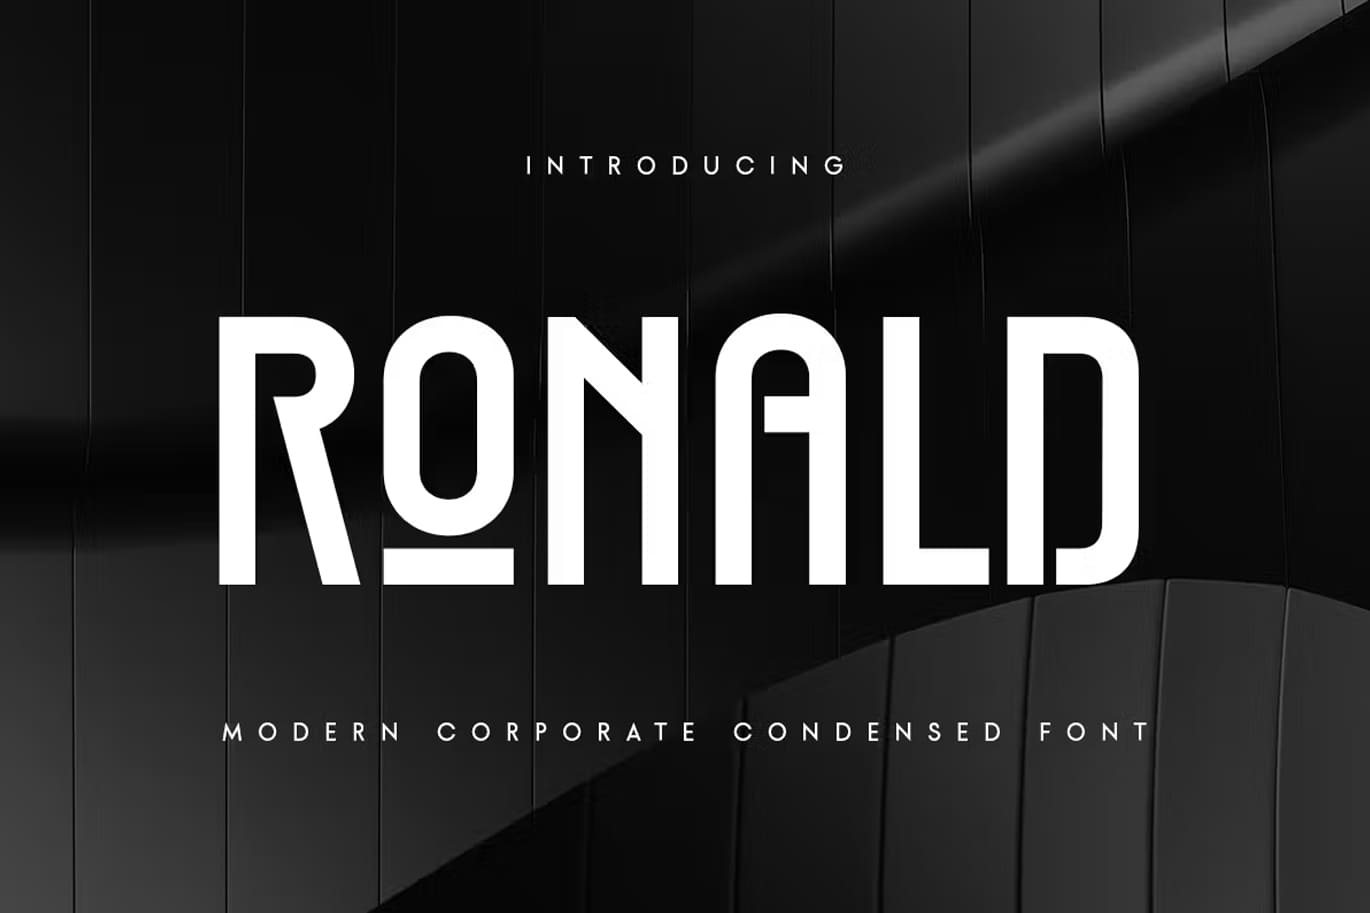 Ronald Modern Corporate Condensed Font